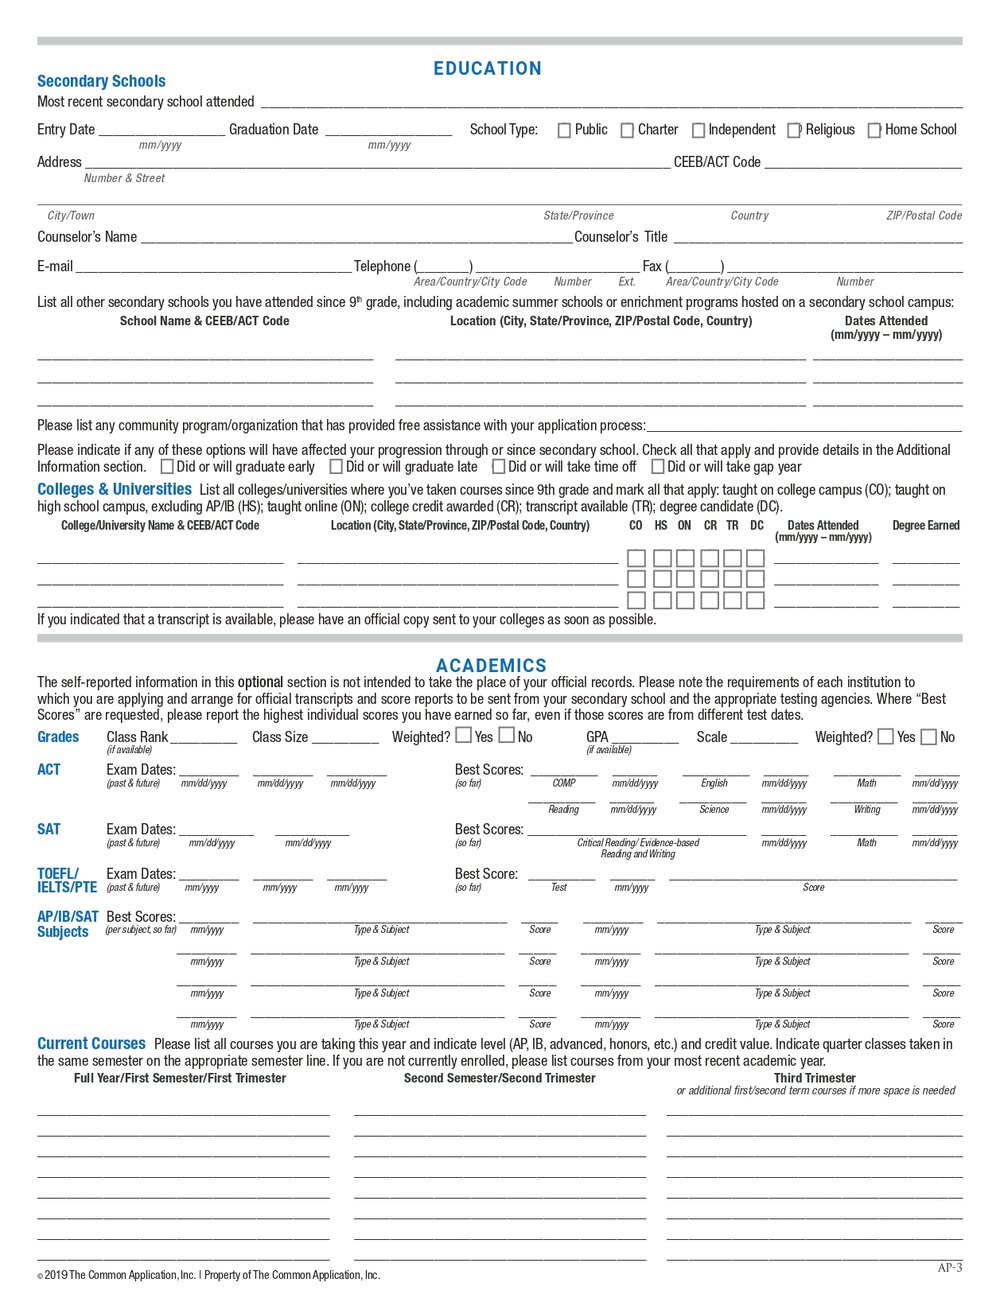 19-20 FY Application (1)_page-0003.jpg